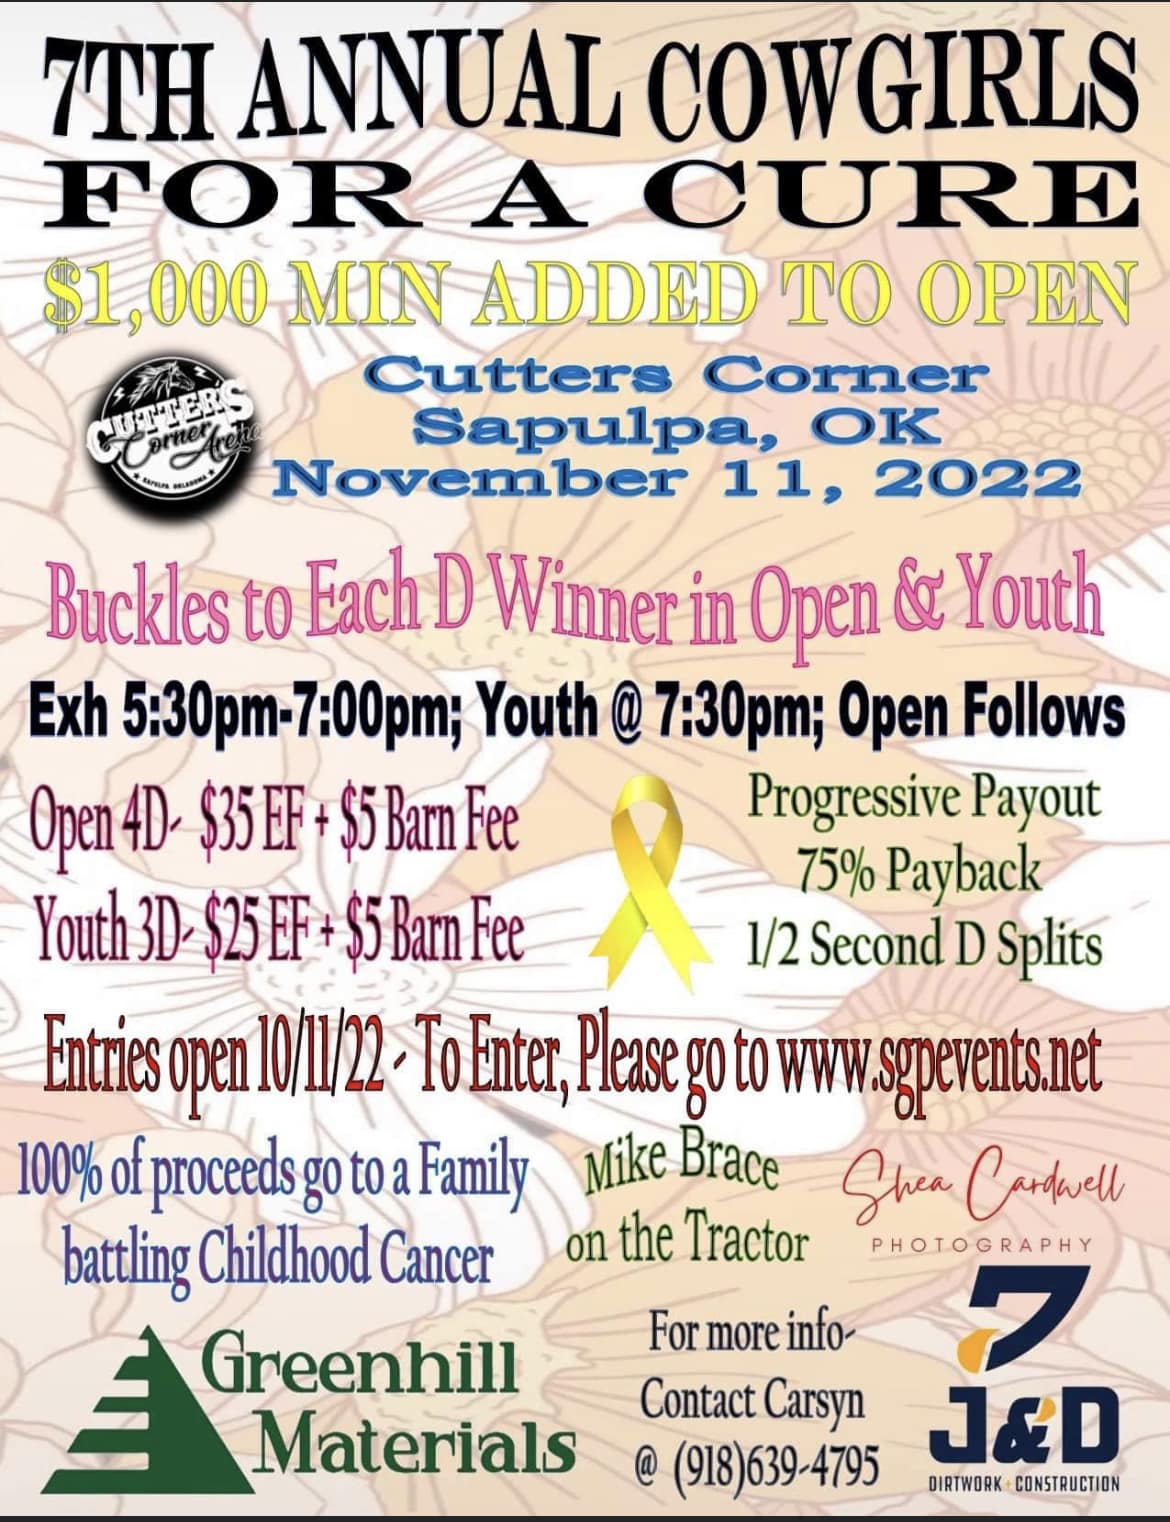 7th Annual Cowgirls For A Cure